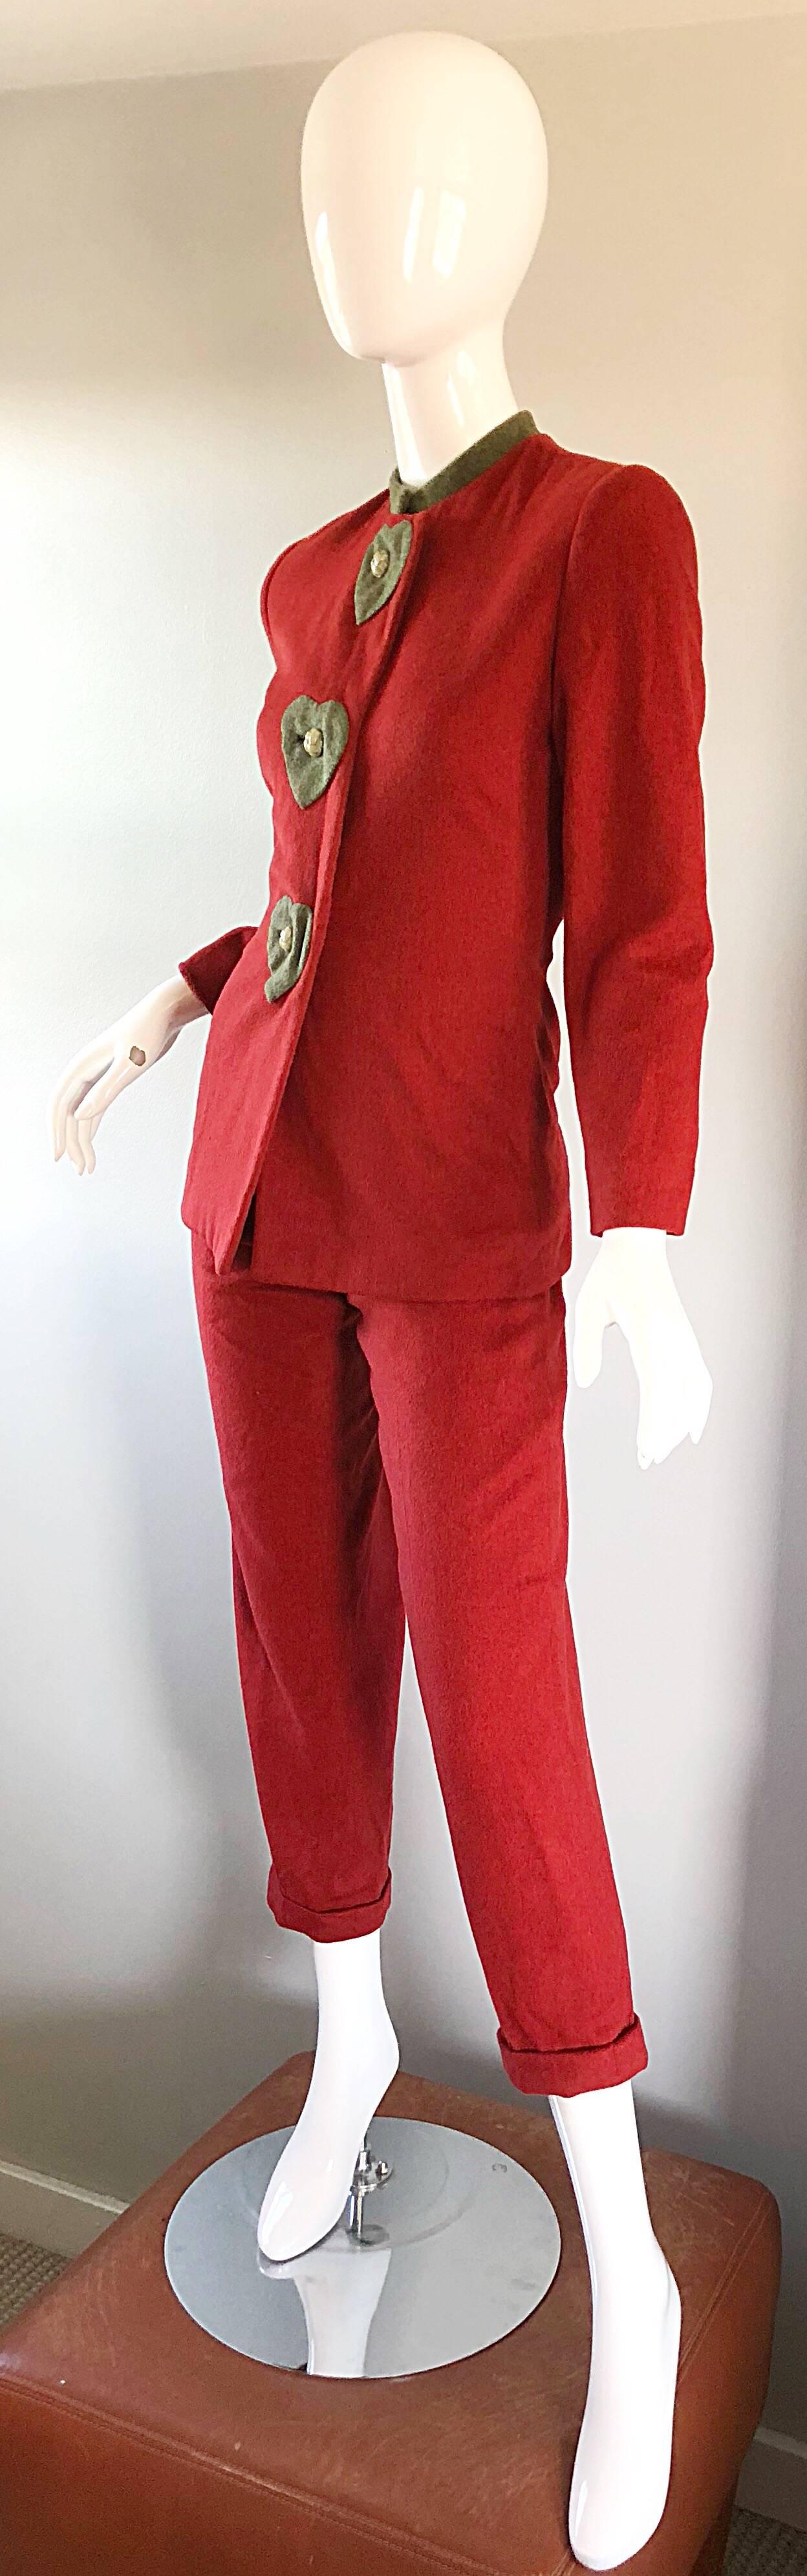 Women's Carolina Herrera Rare Early 1990s Size 6 Brick Red Novelty Heart Print Pant Suit For Sale